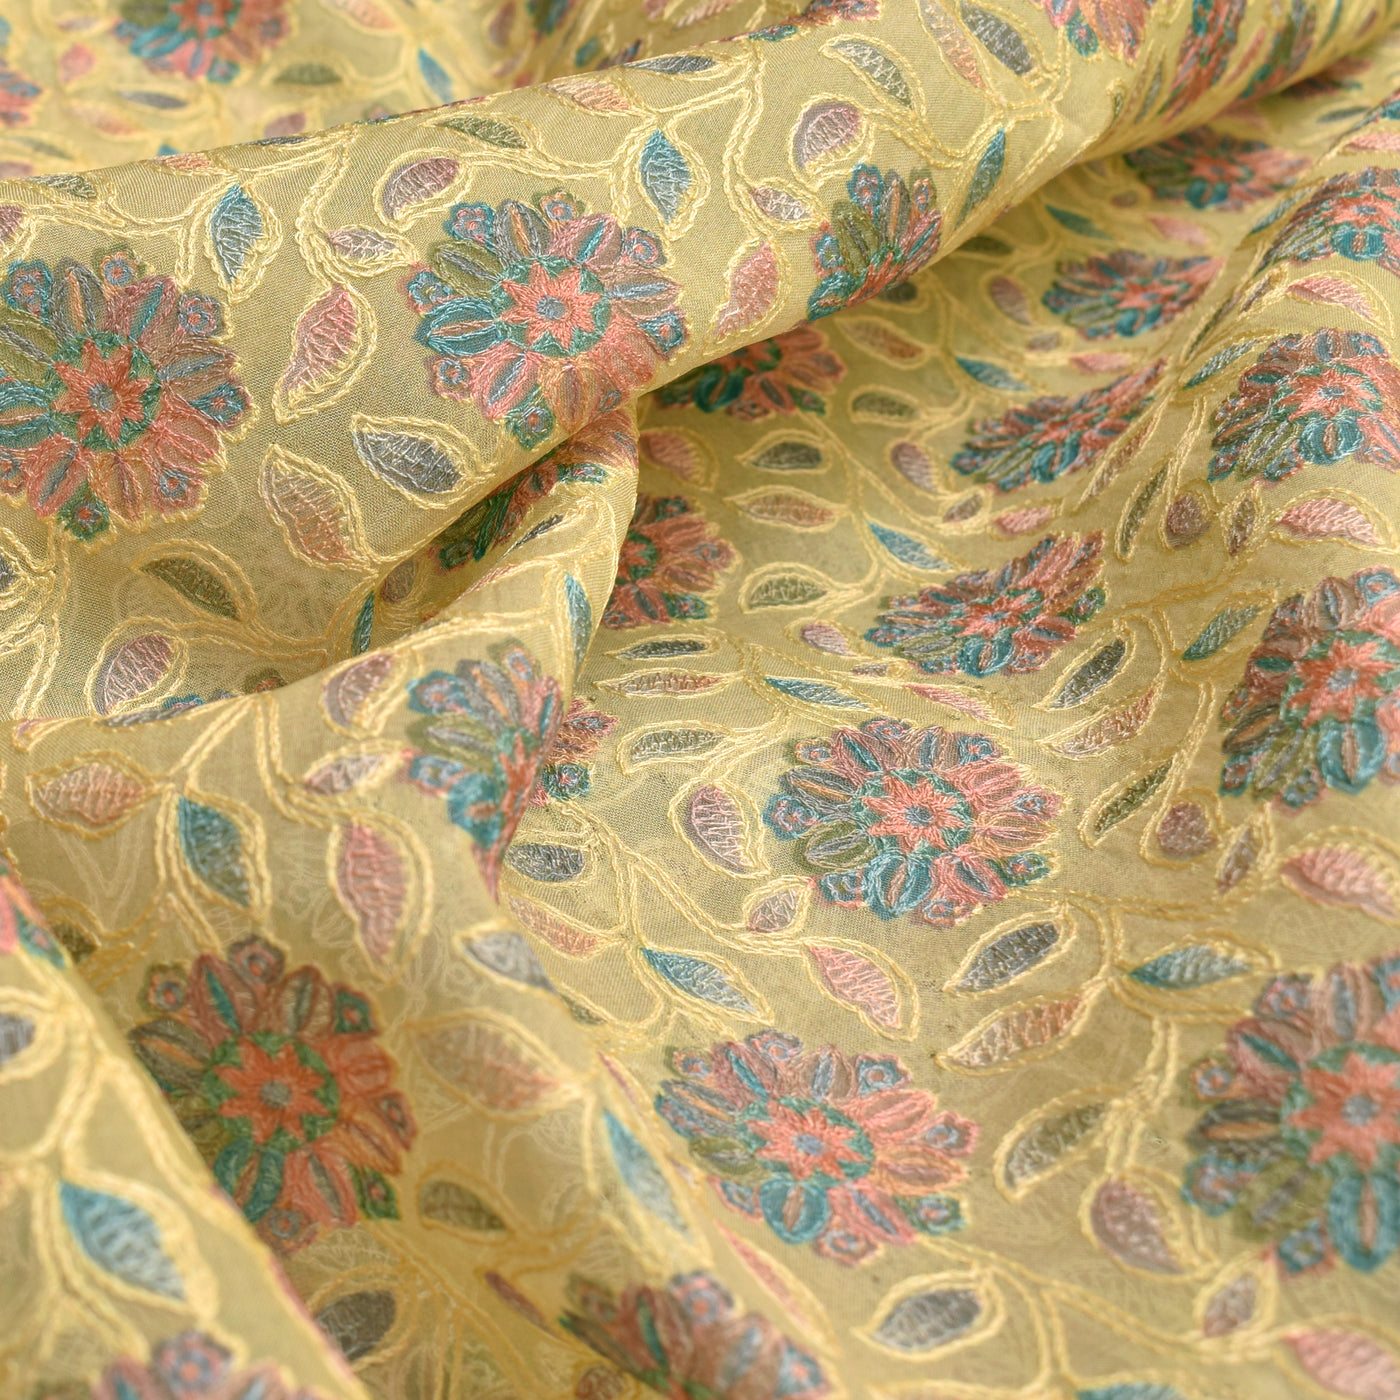 Yellow Organza Fabric with Floral Thread Embroidery Design